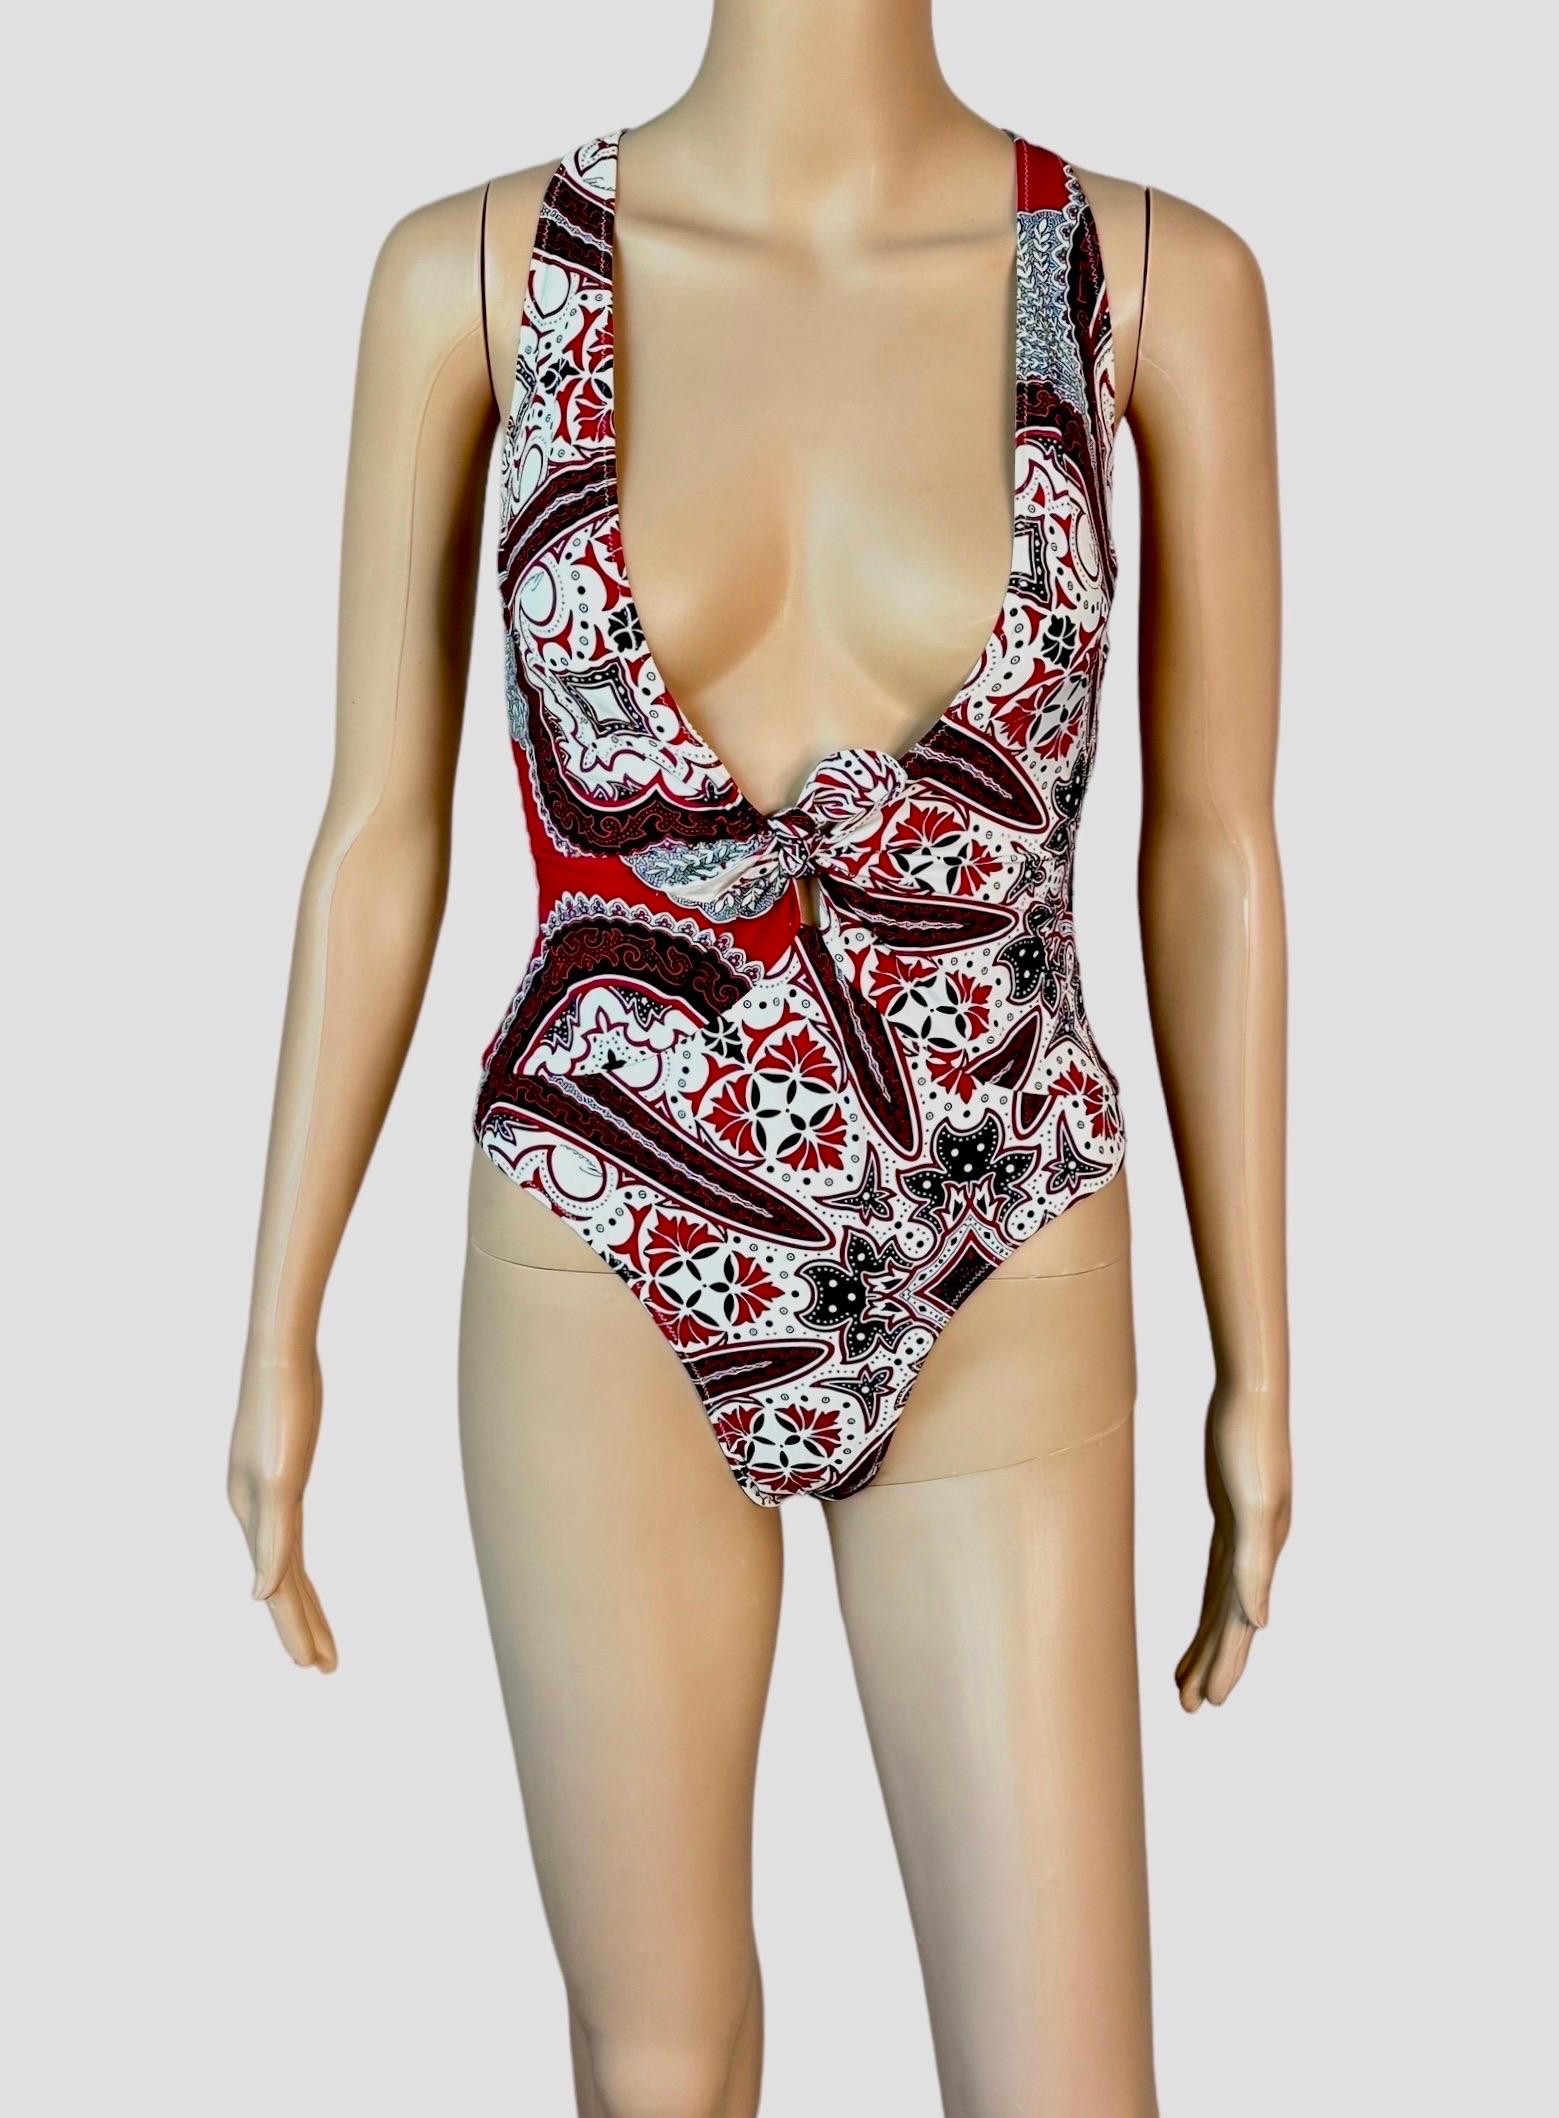 Tom Ford for Gucci Cruise 2004 Unworn One Piece Bodysuit Swimsuit Swimwear  For Sale 1